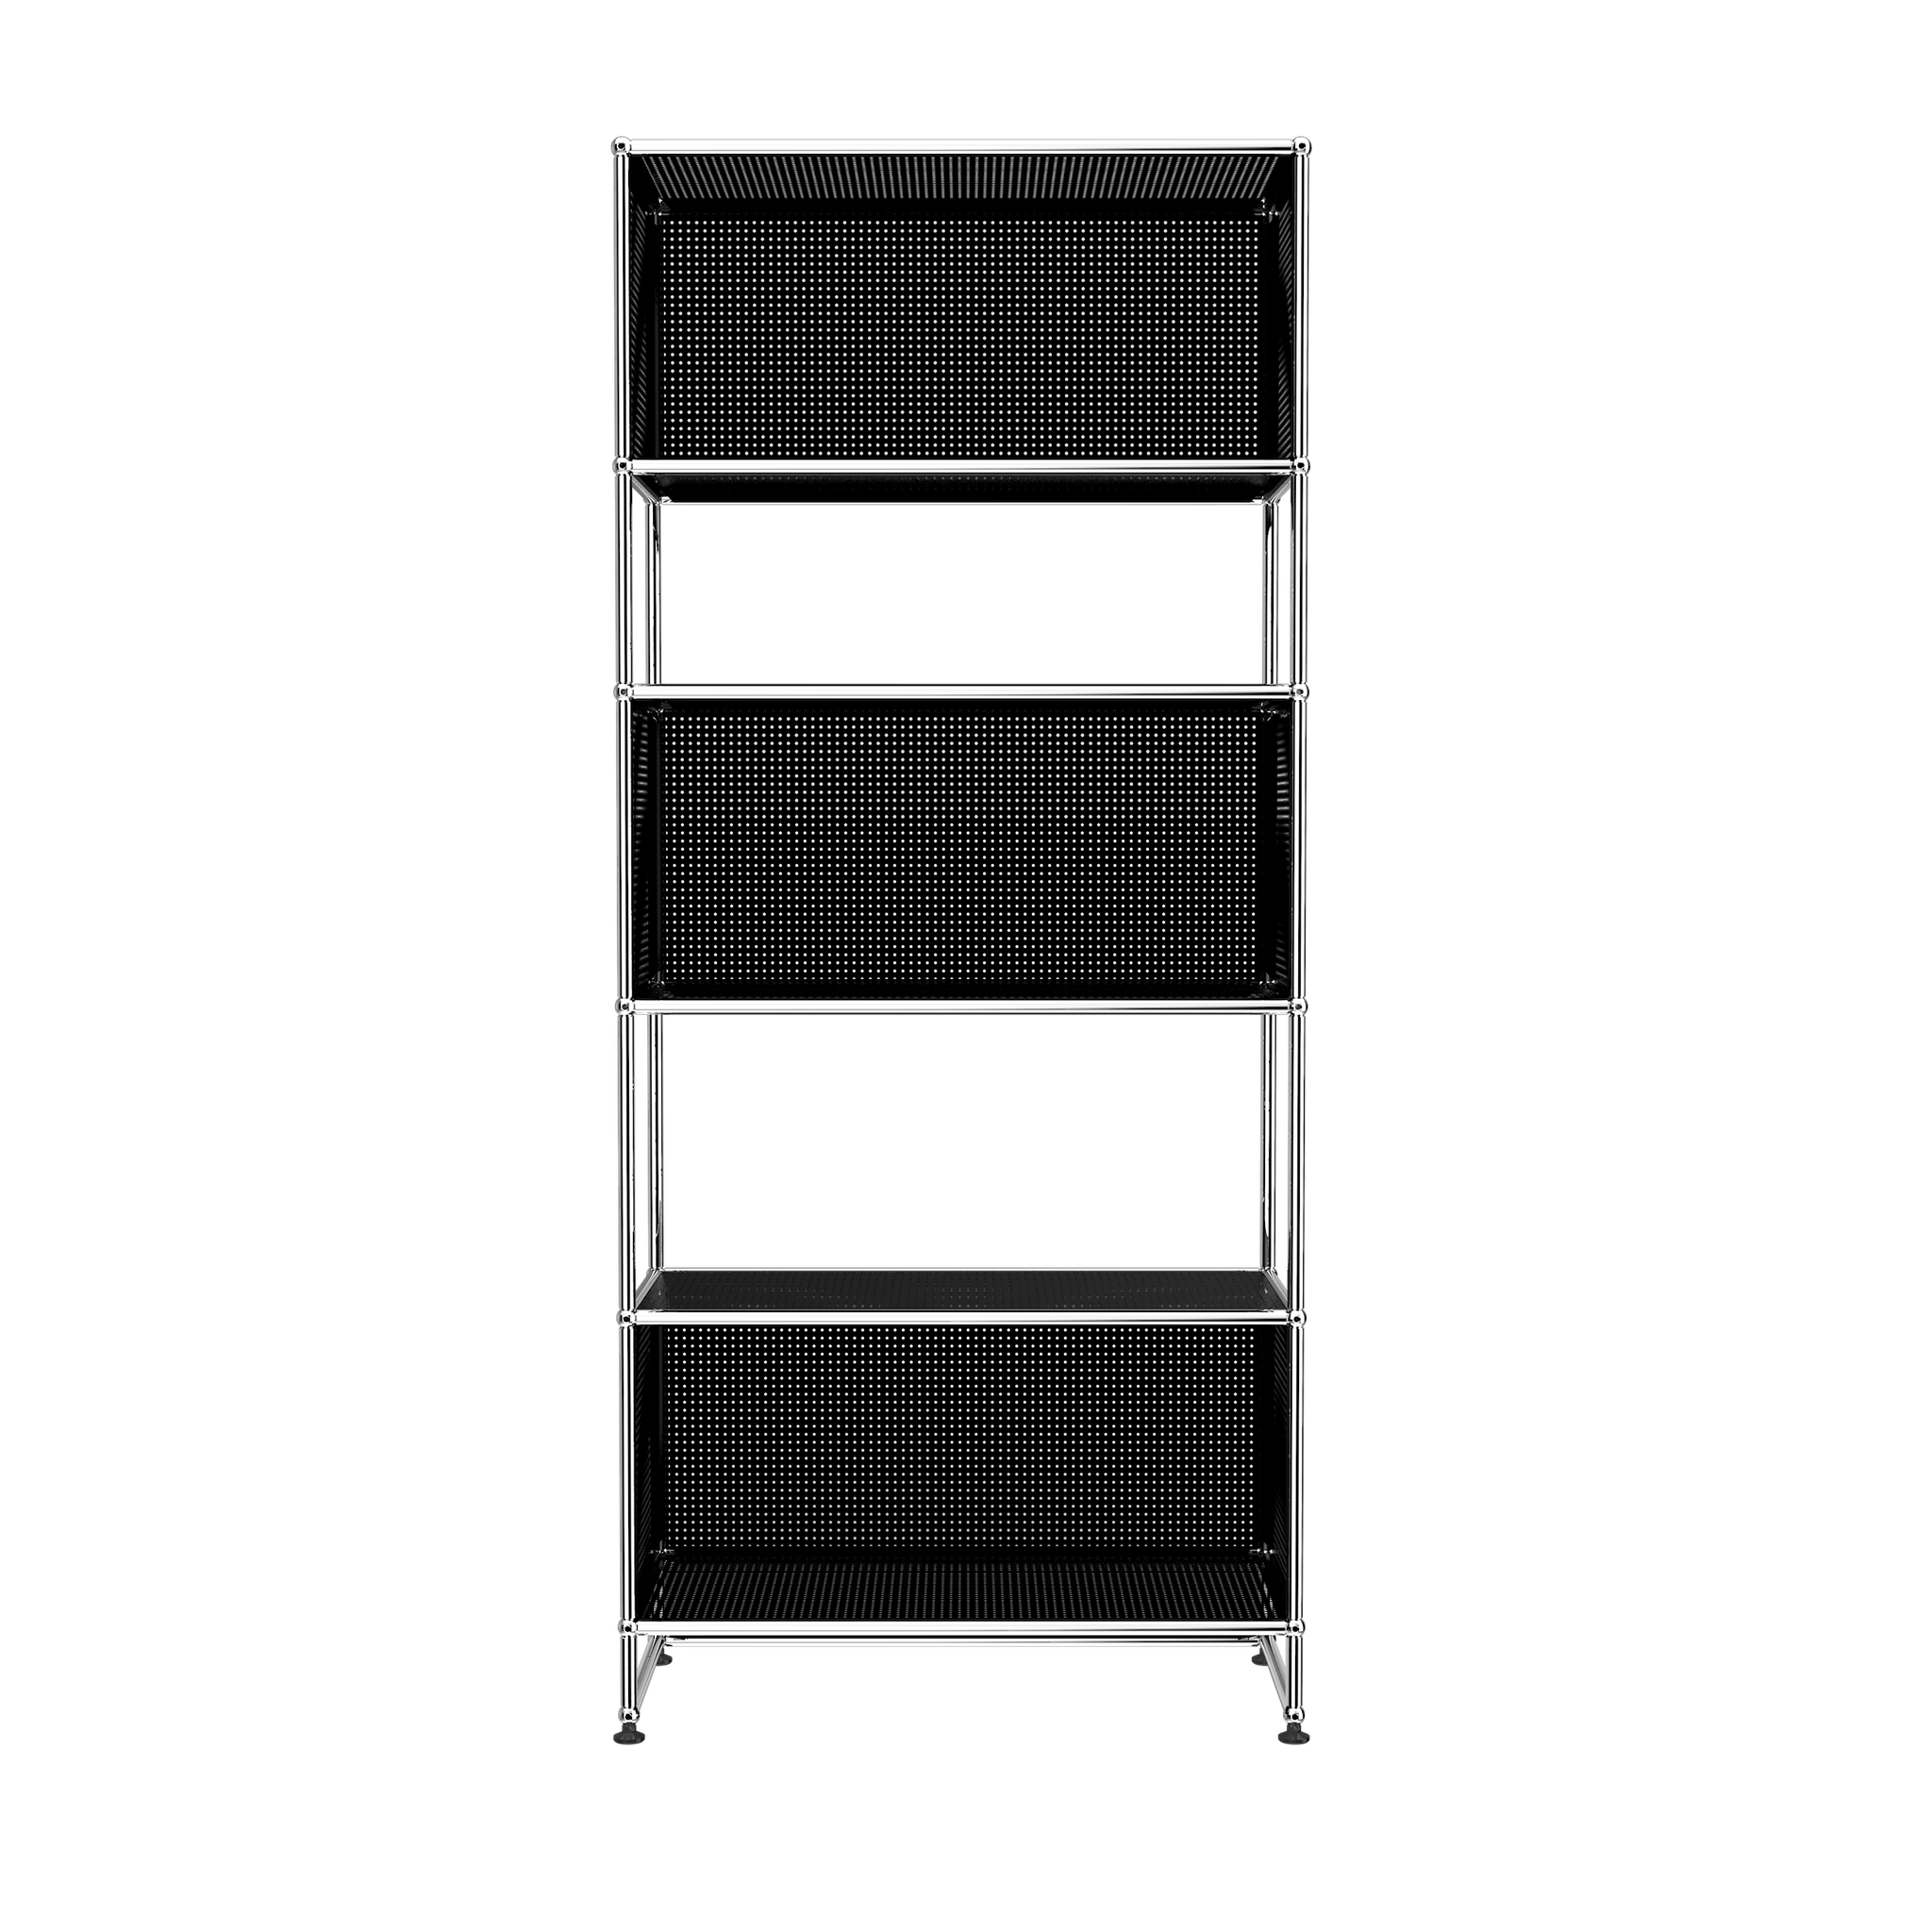 USM Haller 3 Box Shelving with Perforated Panels (RE119) in Graphite Black